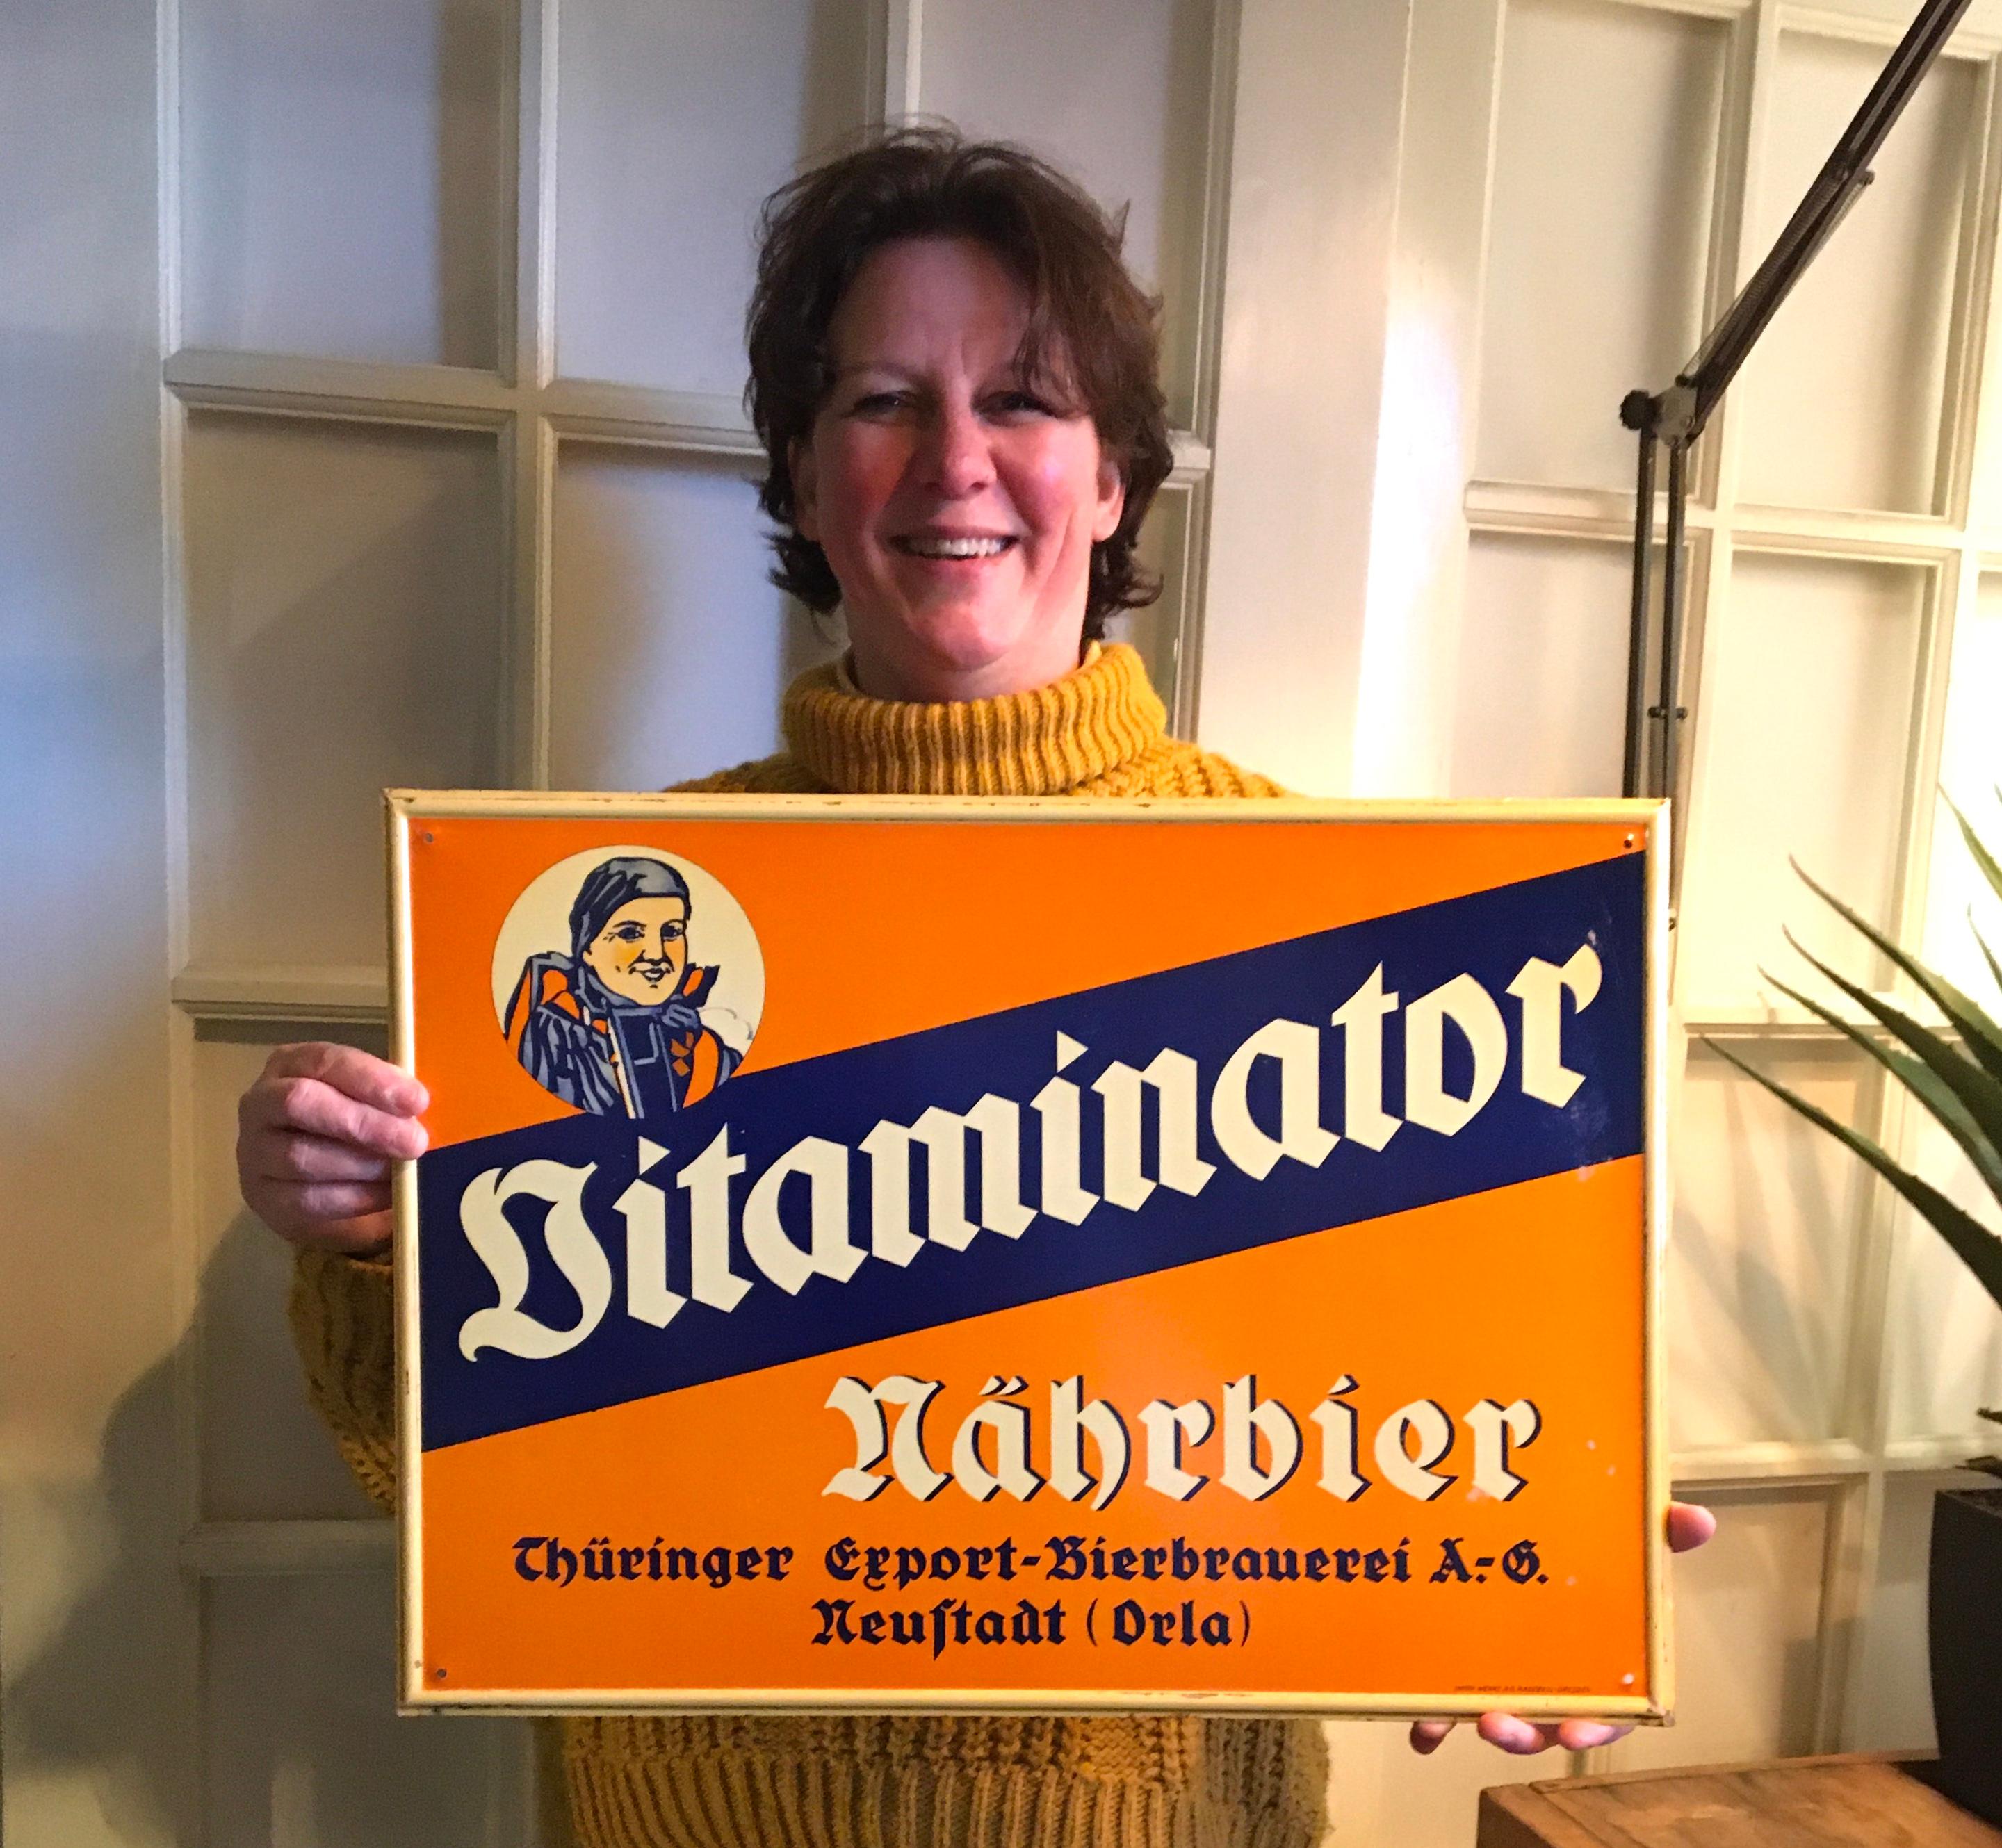 Tin advertising sign for German Beer .
This Thuringia beer sign for Vitaminator Nährbier
was made by Union - Werke A-G Radebeul Dresden Germany in the 1940s.
It is an orange with blue sign with nice lettering. 
In beautiful condition with some